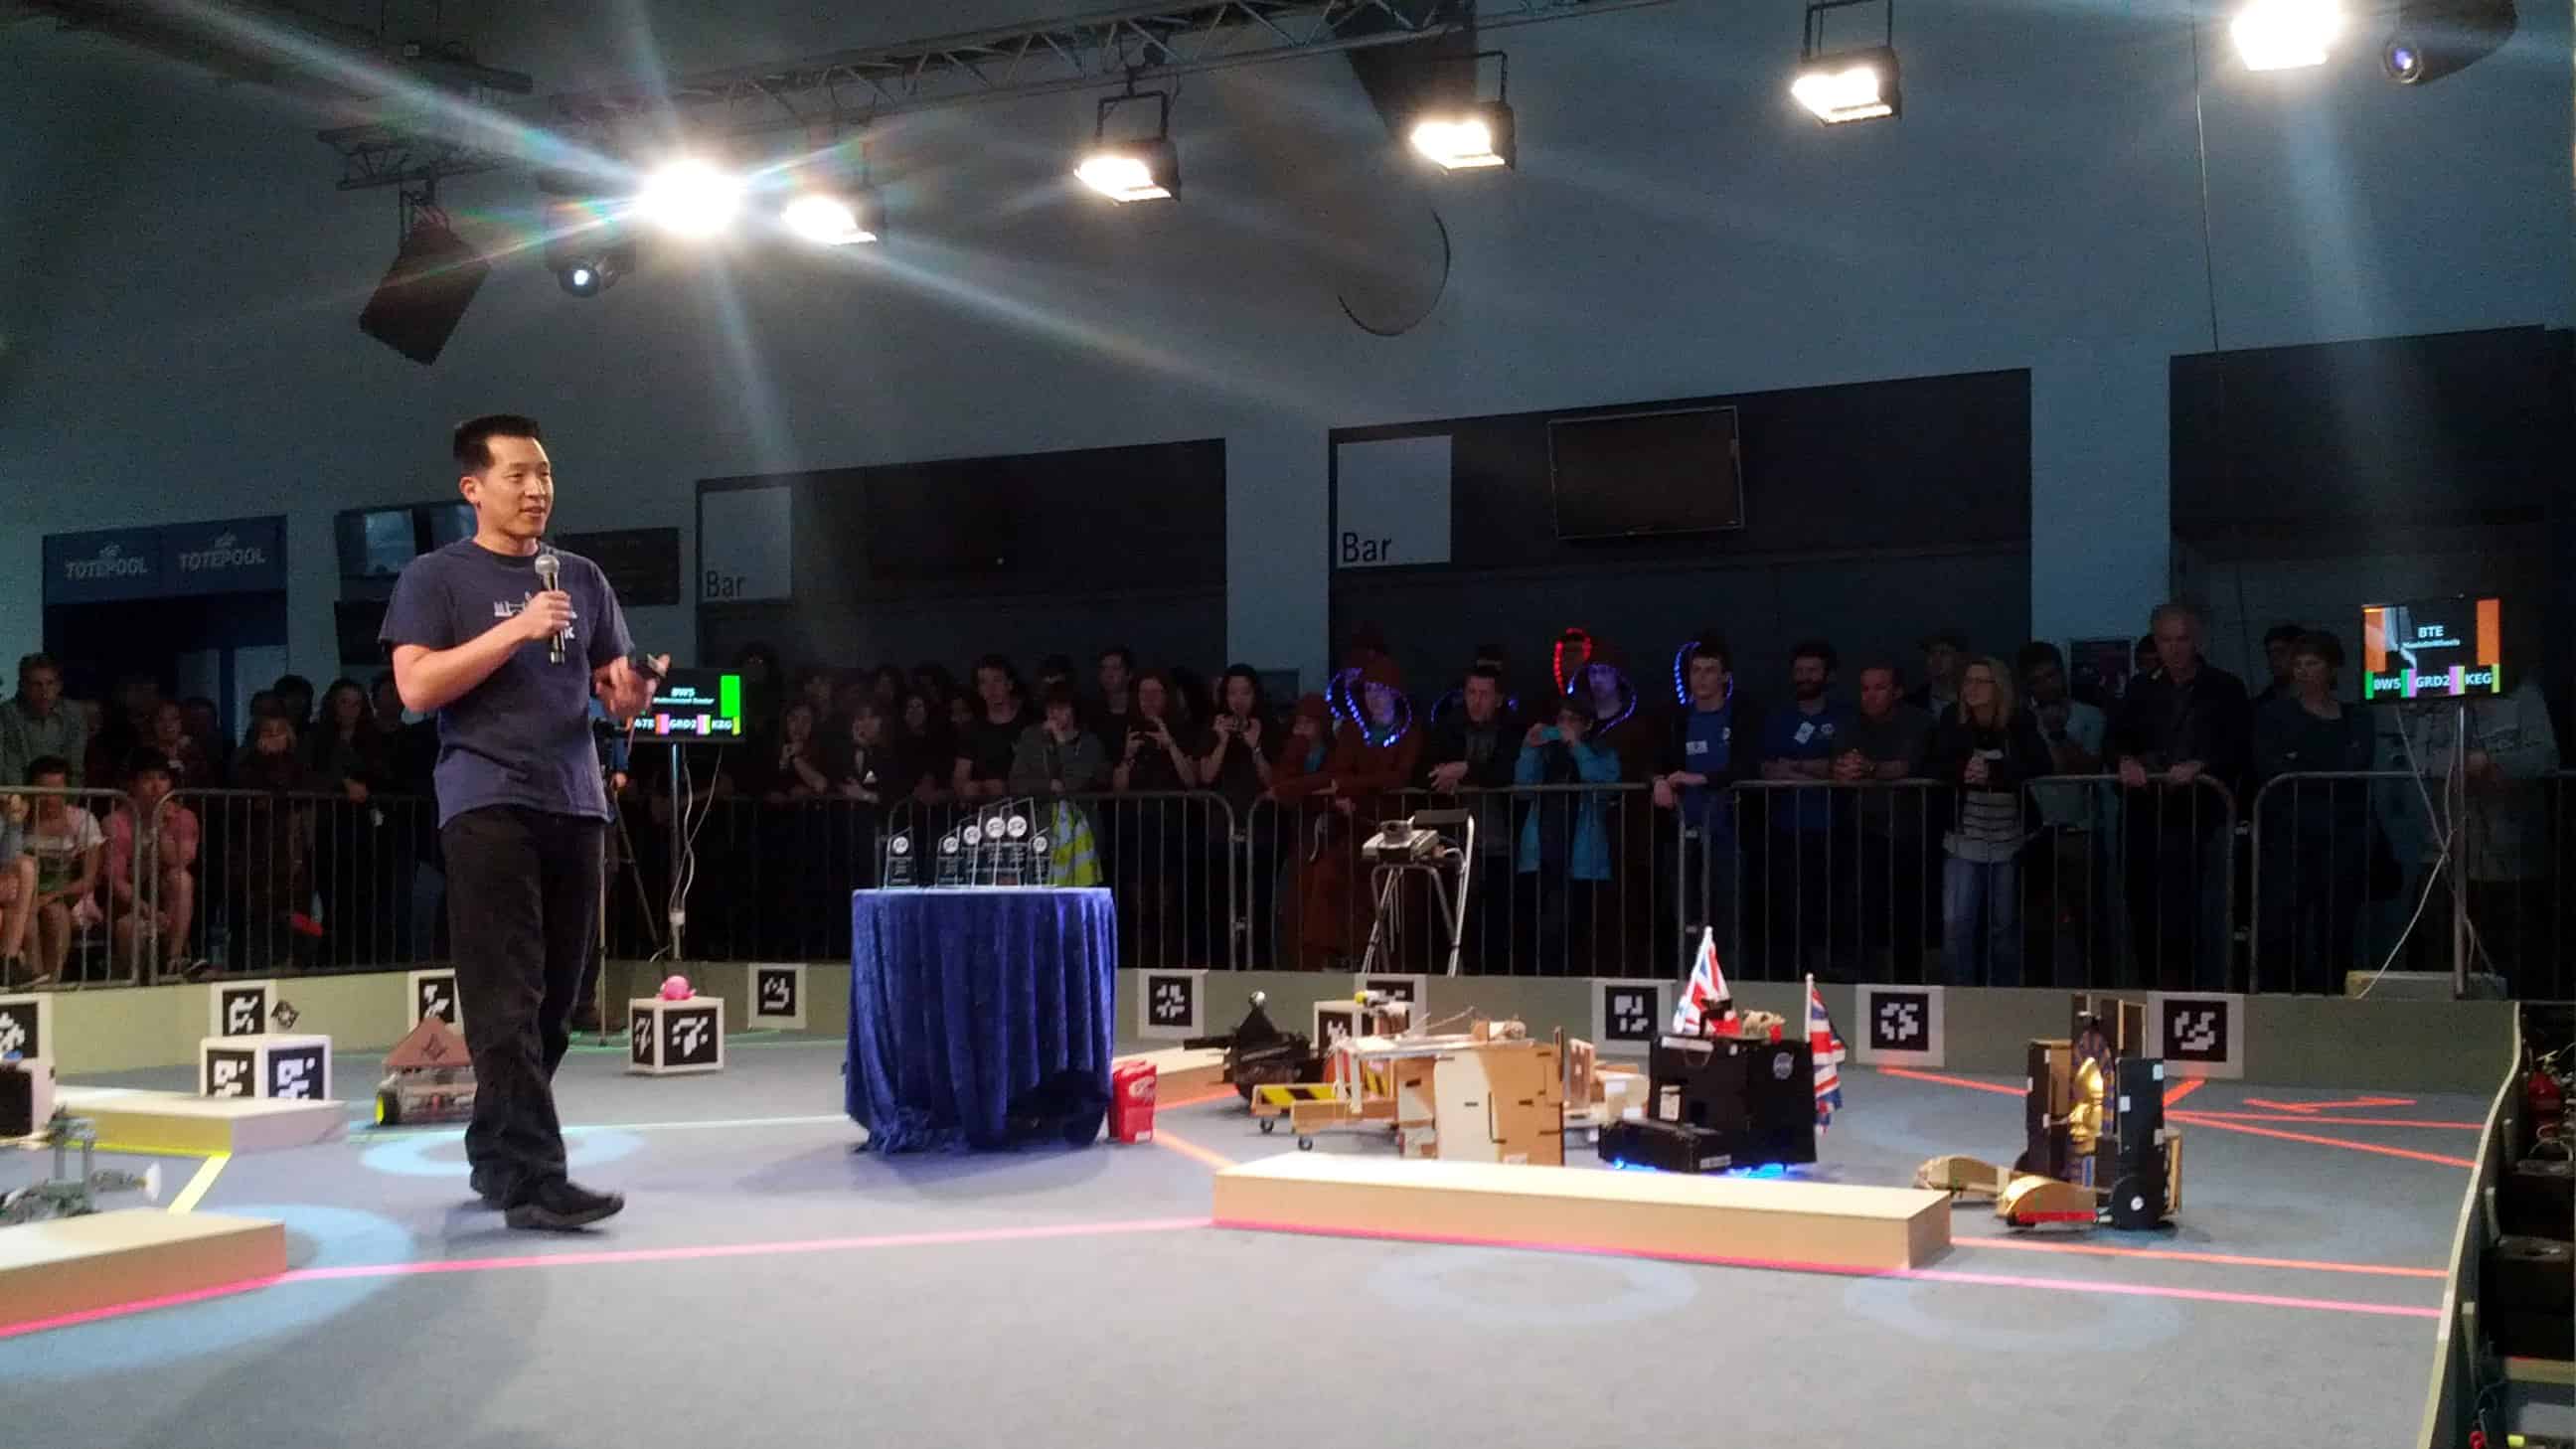 Prize giving ceremony at competition. Robots, awards and a presenter in an arena with competitors watching